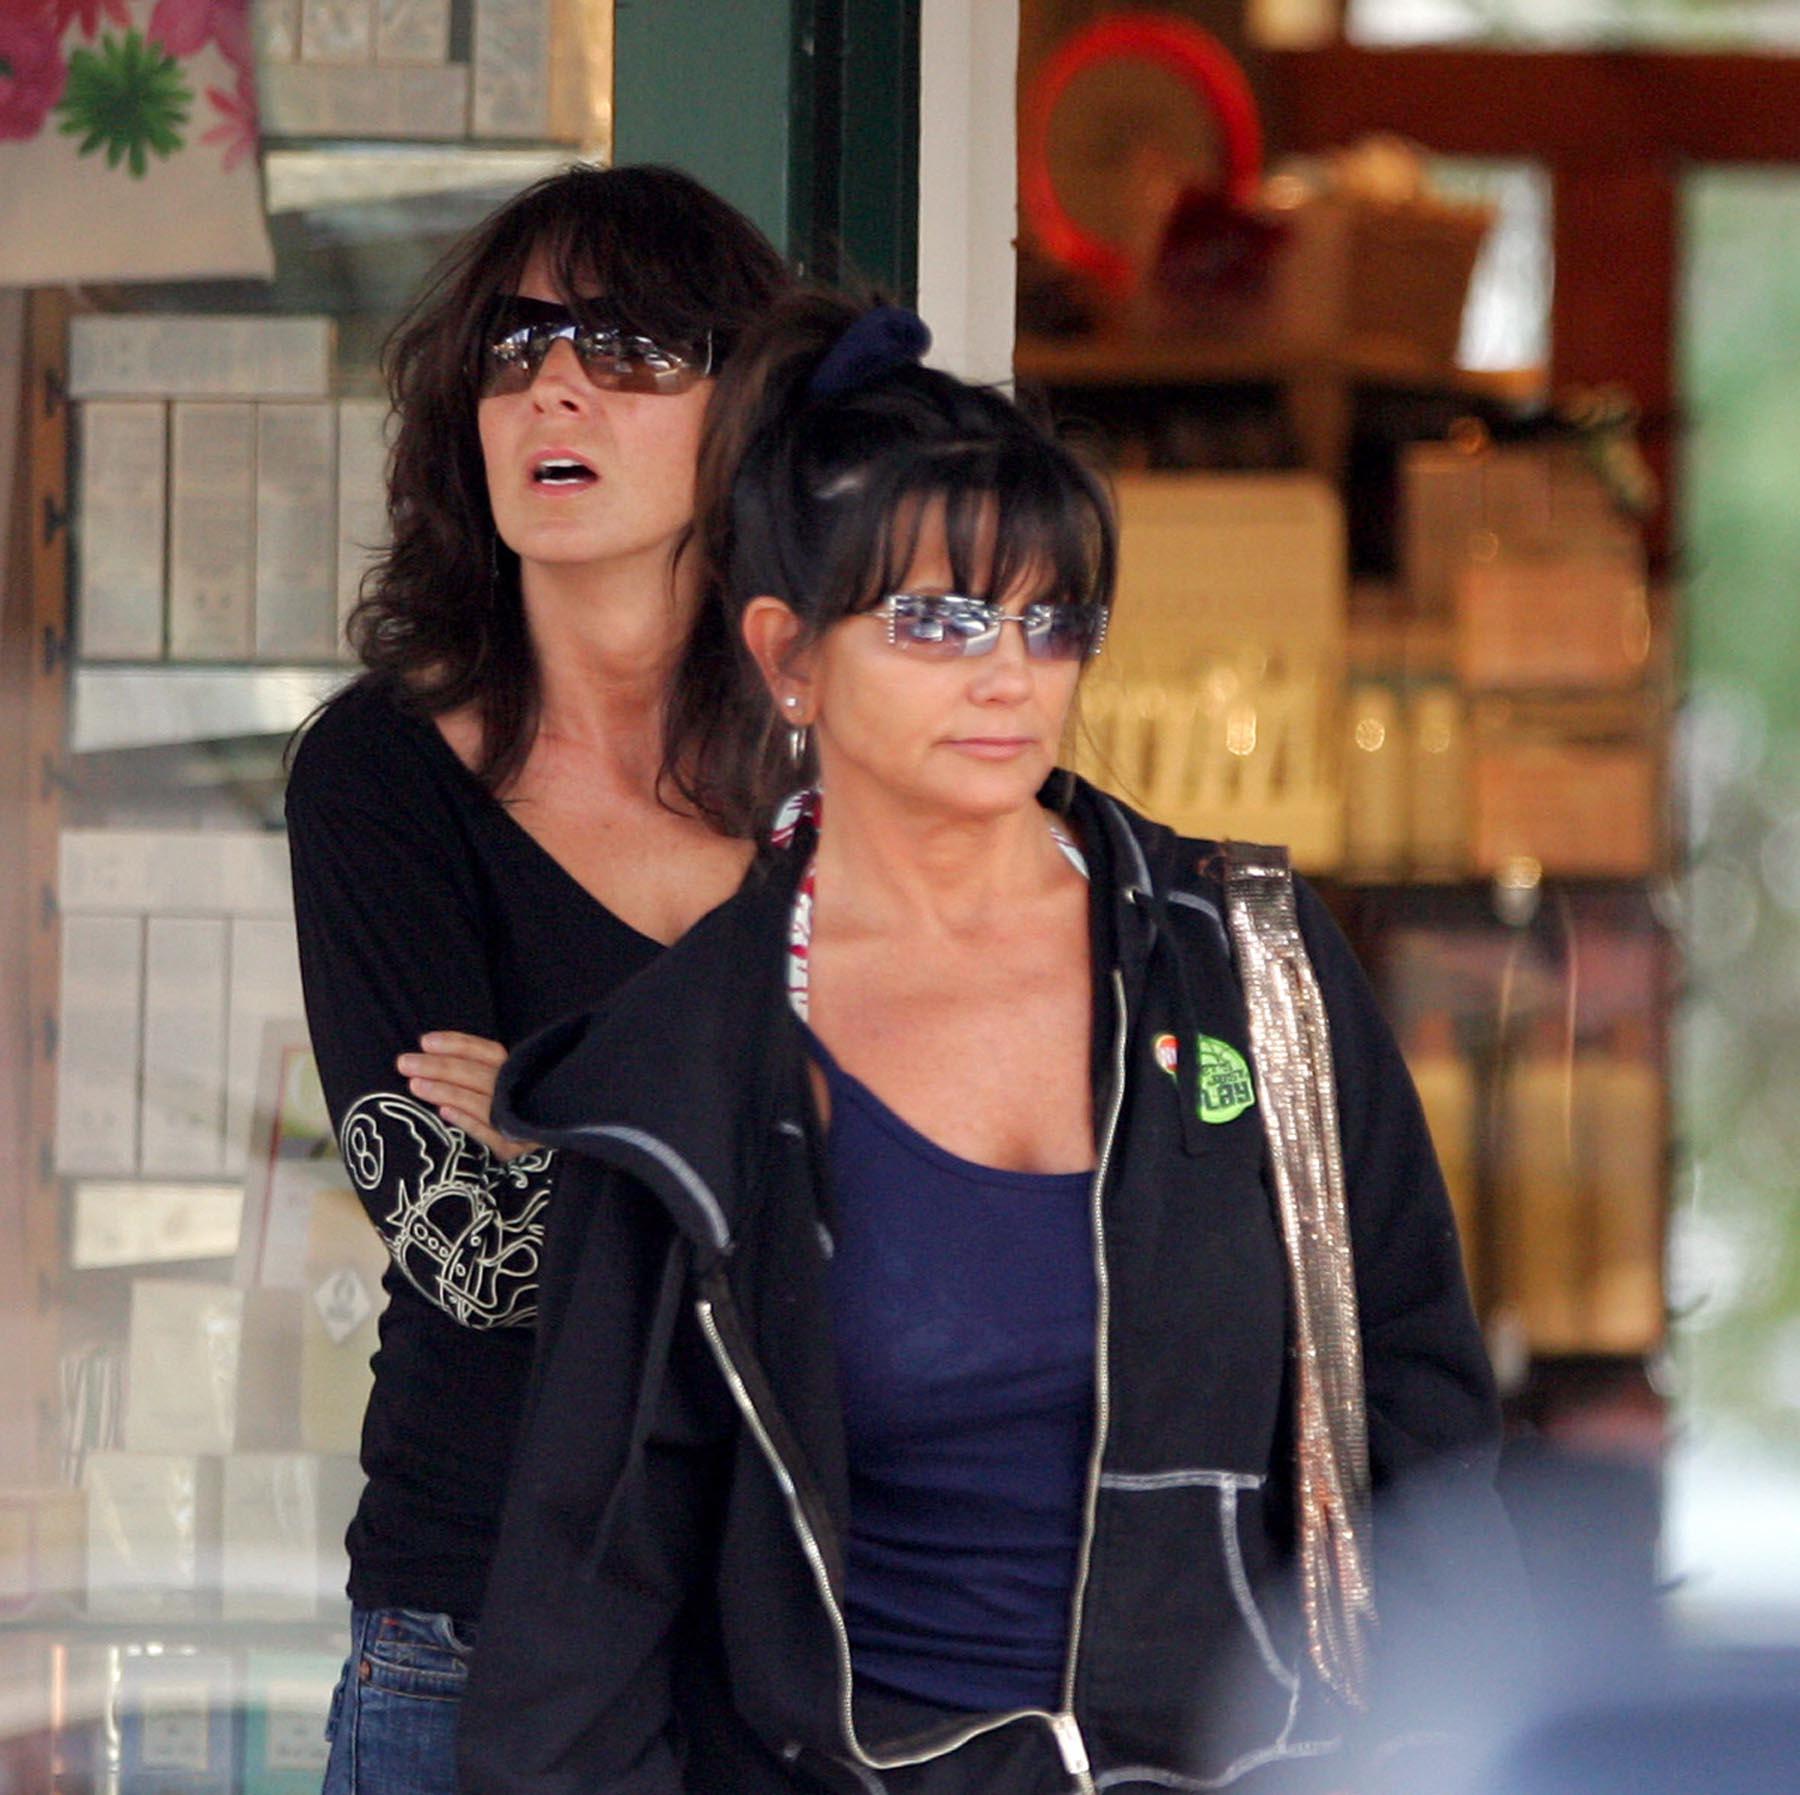 Lynne Spears standing with a friend.